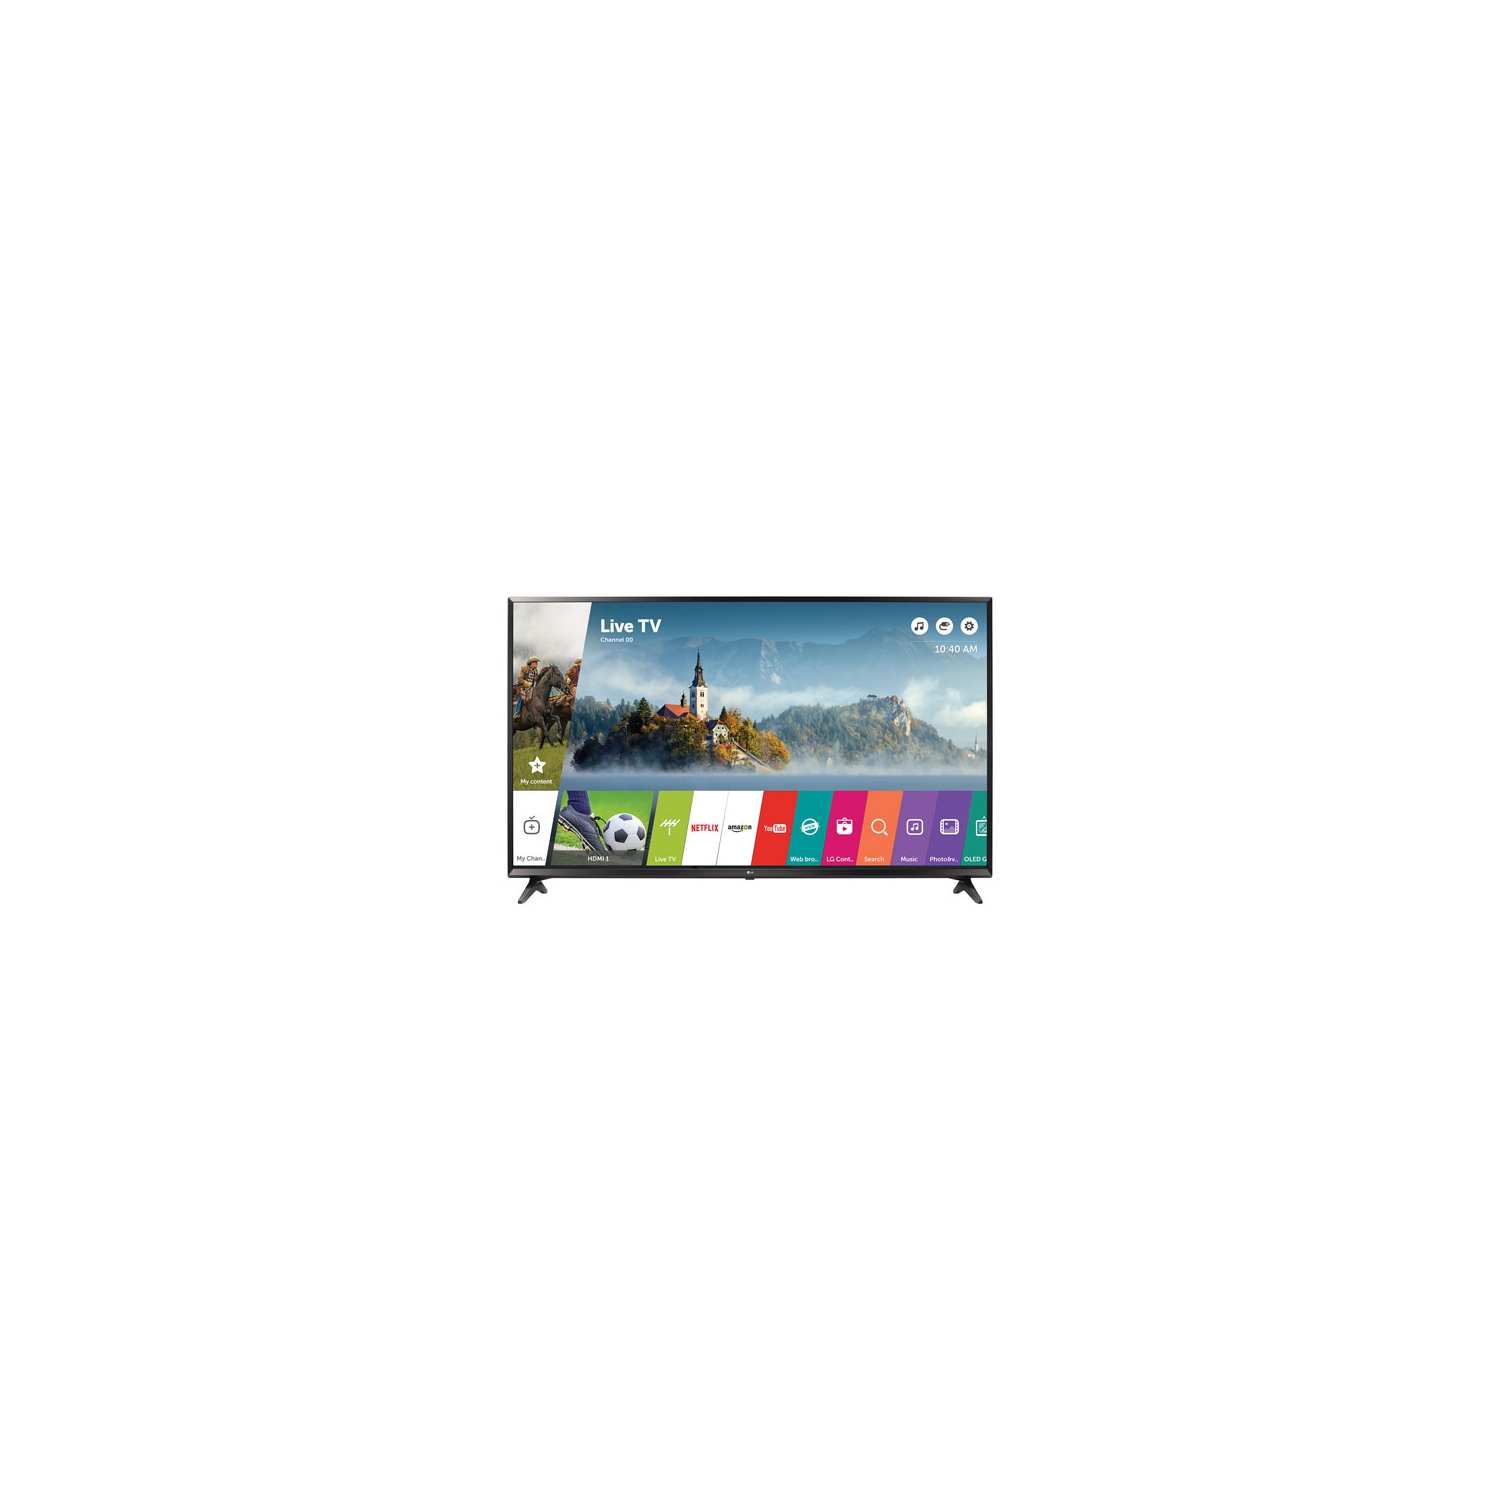 Open Box - LG 65" 4K UHD HDR LED webOS 3.5 Smart TV (65UJ6300) - Black *LOCAL TORONTO DELIVERY ONLY*